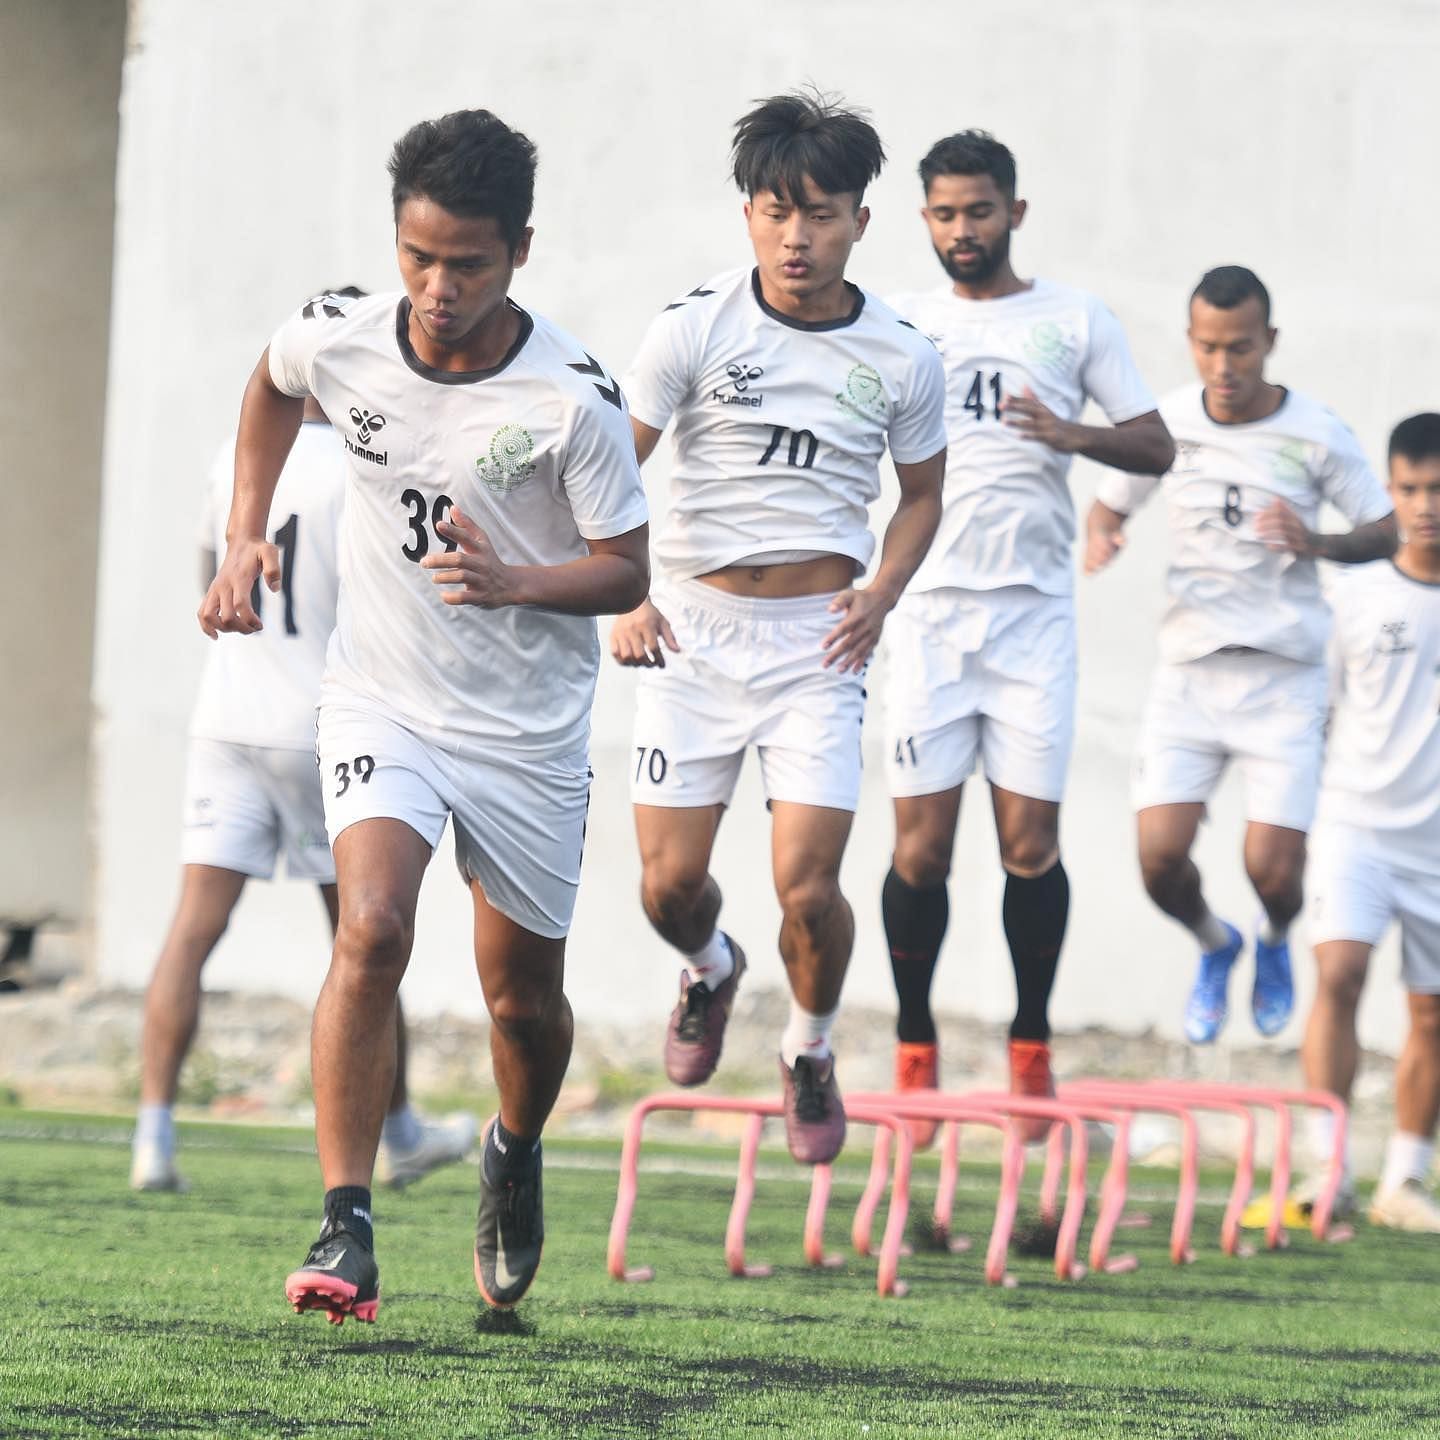 The MSC players sweating it out in a training session ahead of their inaugural I-League 2021-22 fixture against Sudeva Delhi FC. (Image Courtesy - Mohammedan Sporting Club)